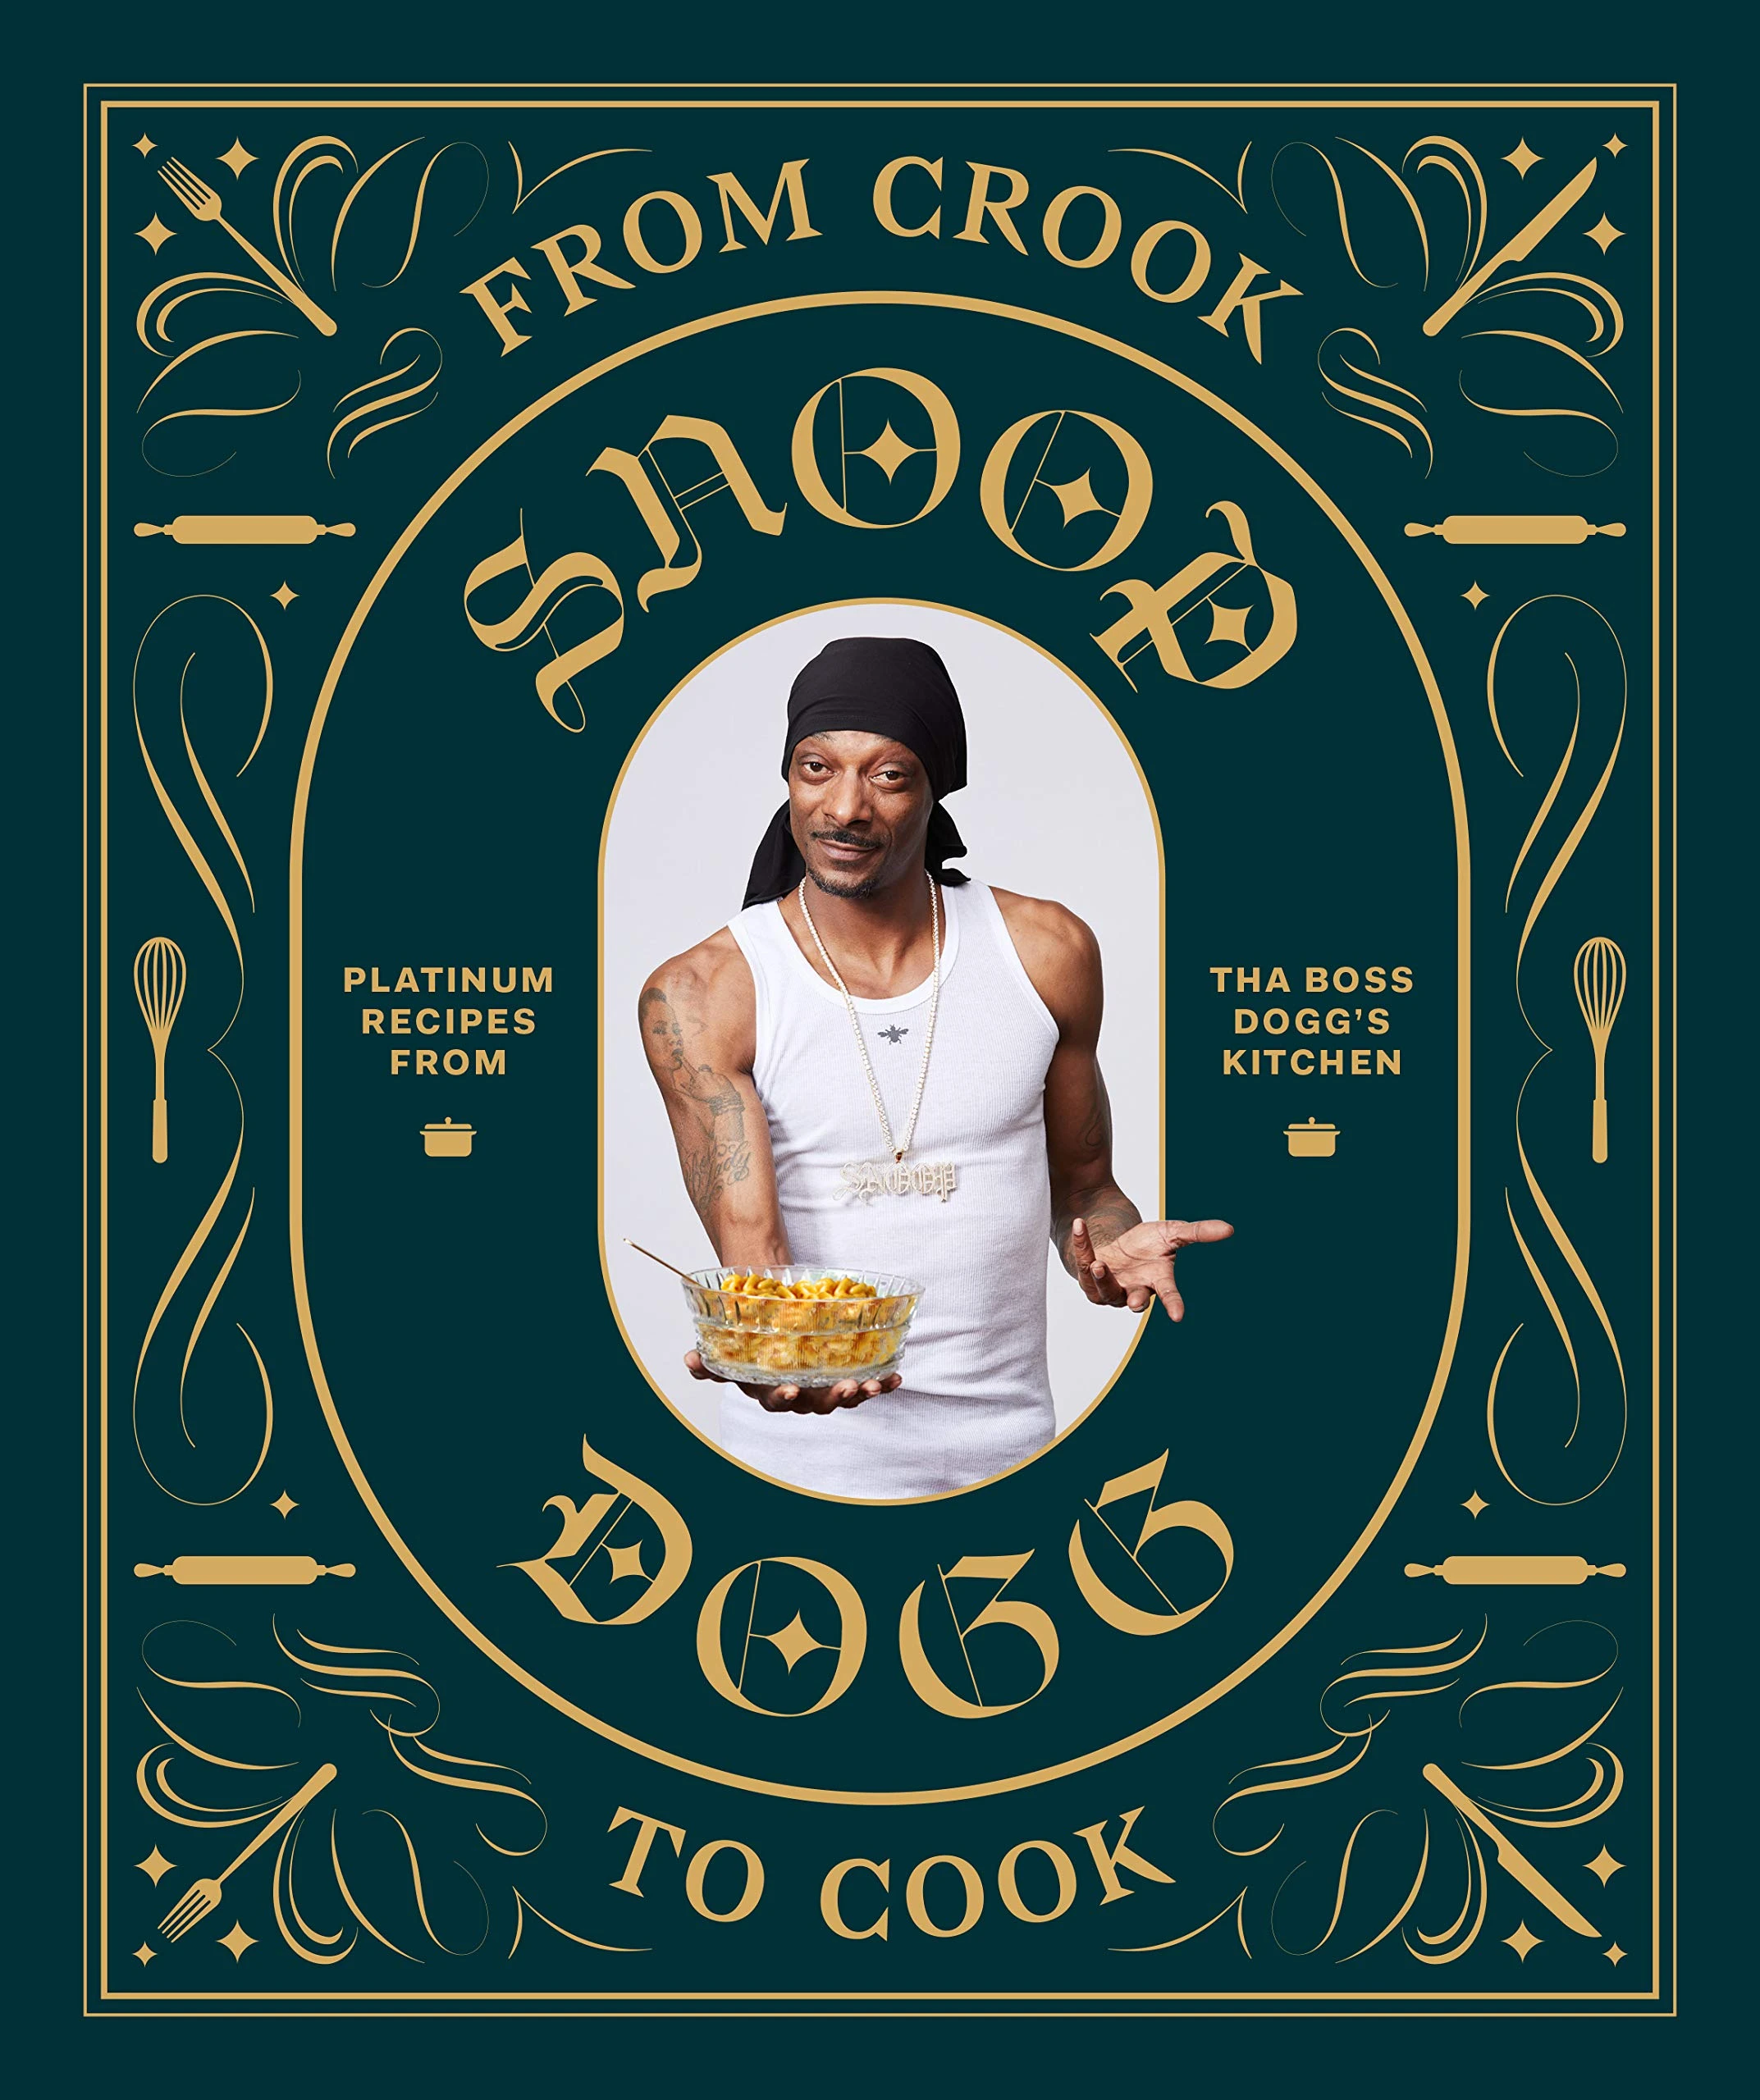 『From Crook to Cook』／画像はAmazonより